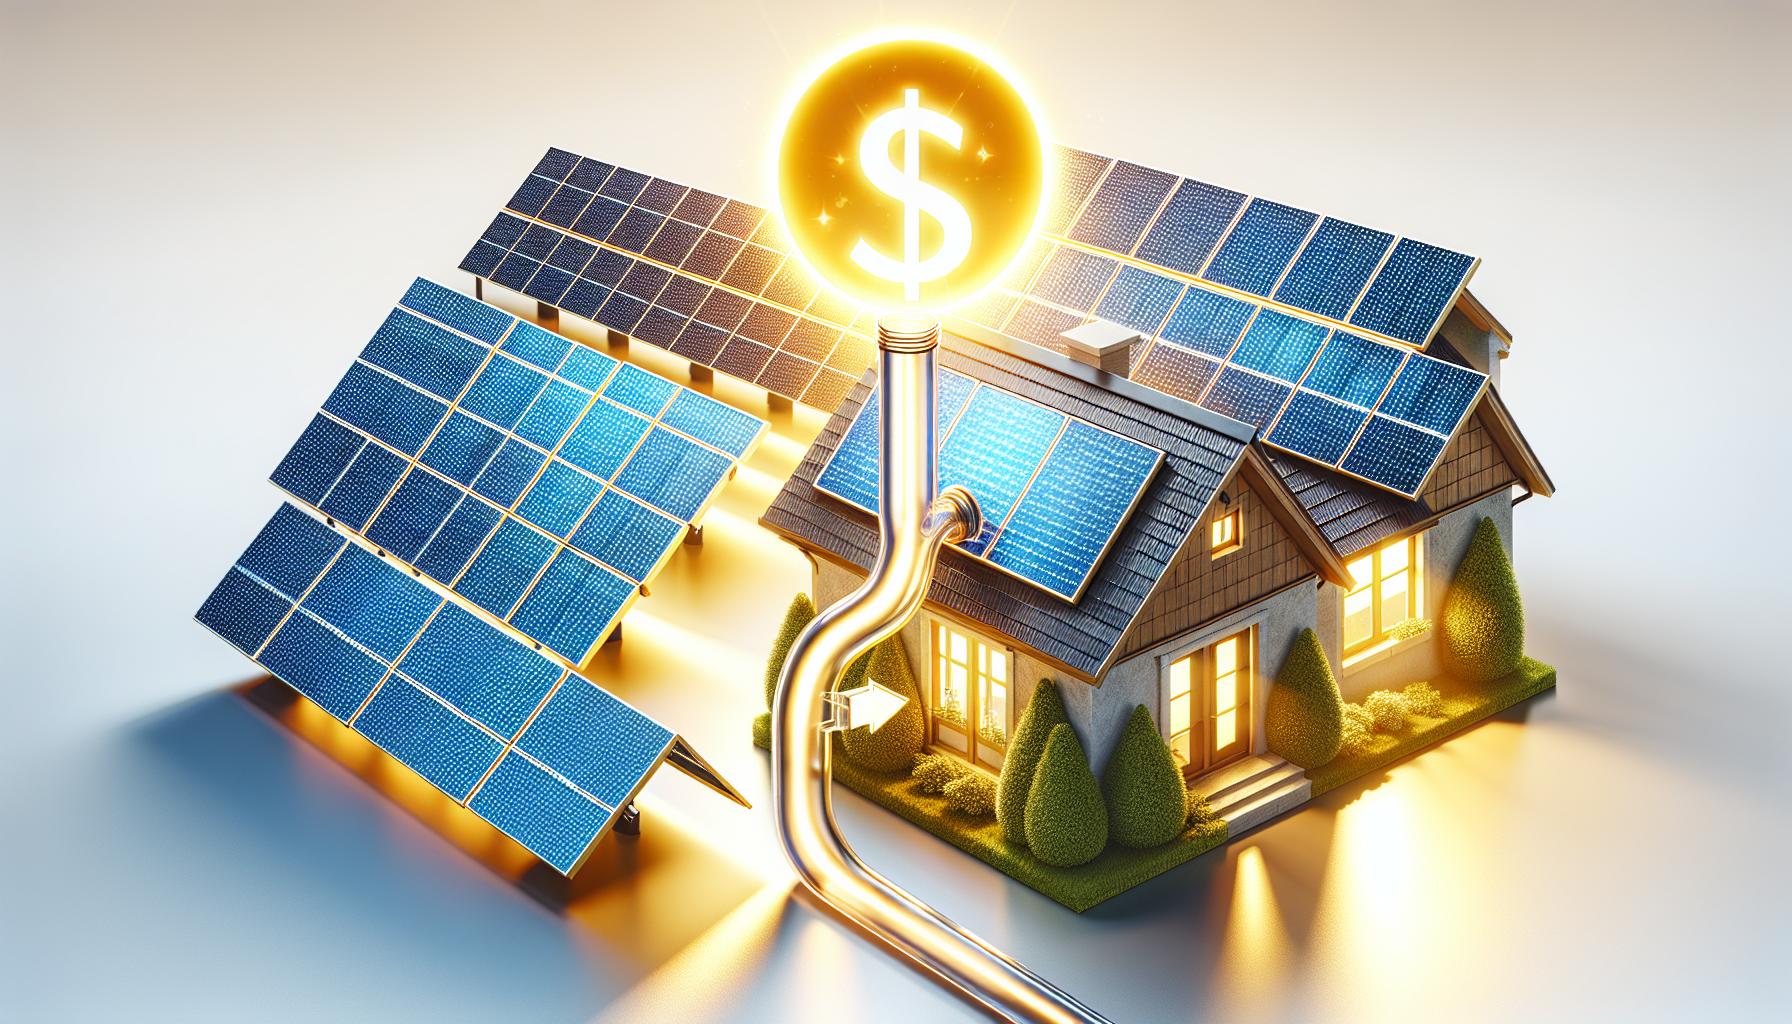 Solar panels harnessing energy for hot water systems, reducing energy costs and increasing property value